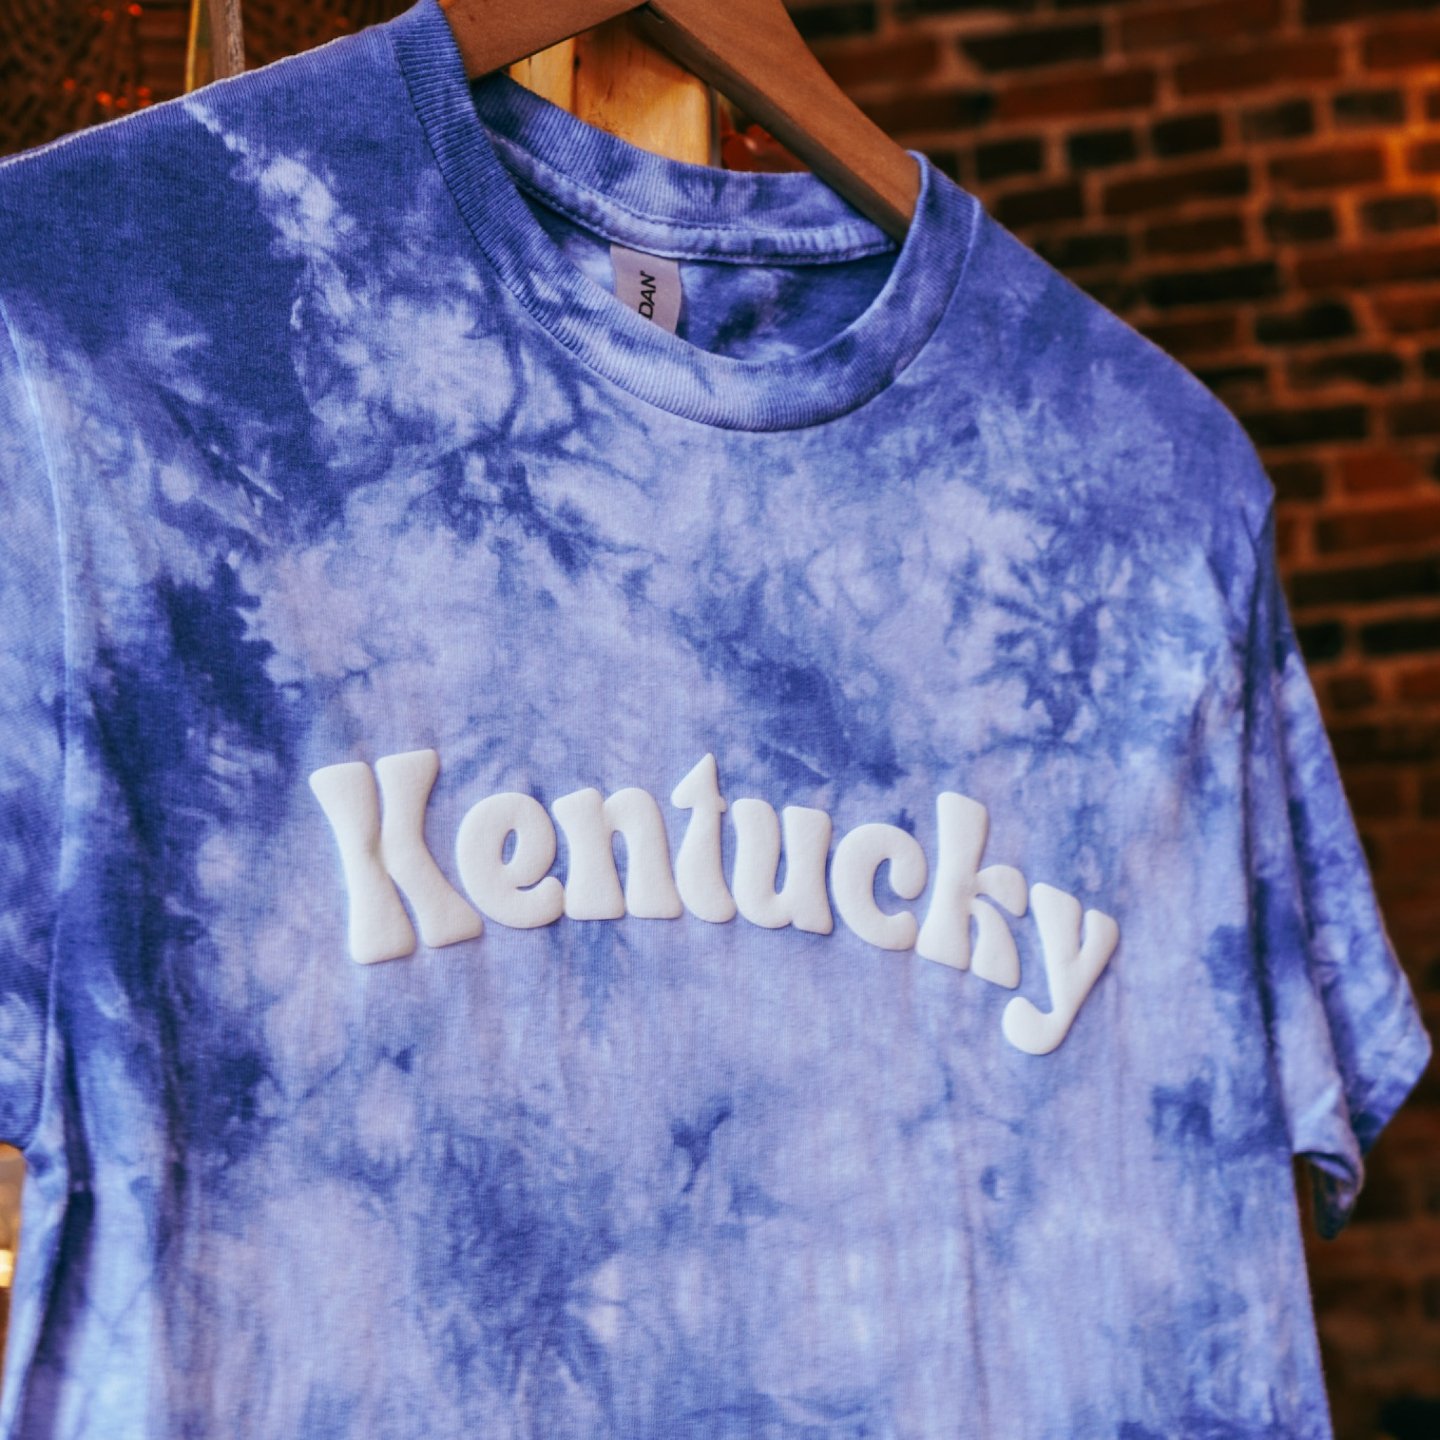 Gear up for some Kentucky lovin' with these tees from @embracedchaosdesigns! 🌟 Whether you're a die-hard fan or just lovin' the bluegrass vibes, we've got your wardrobe covered. Grab yours today and rep the best of the Bluegrass State! 💙🐎 

#theam